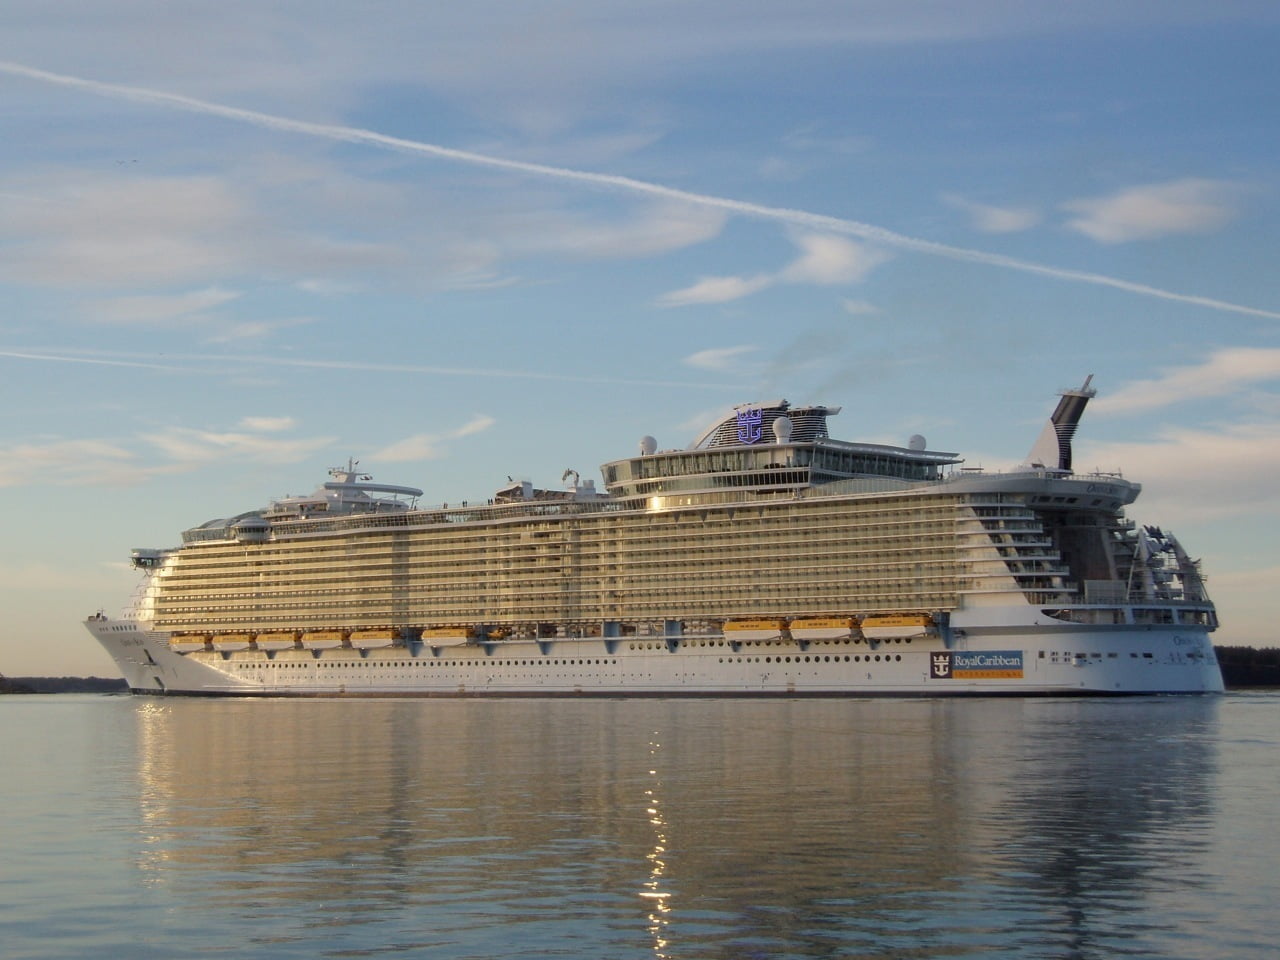 Image of oasis of the seas